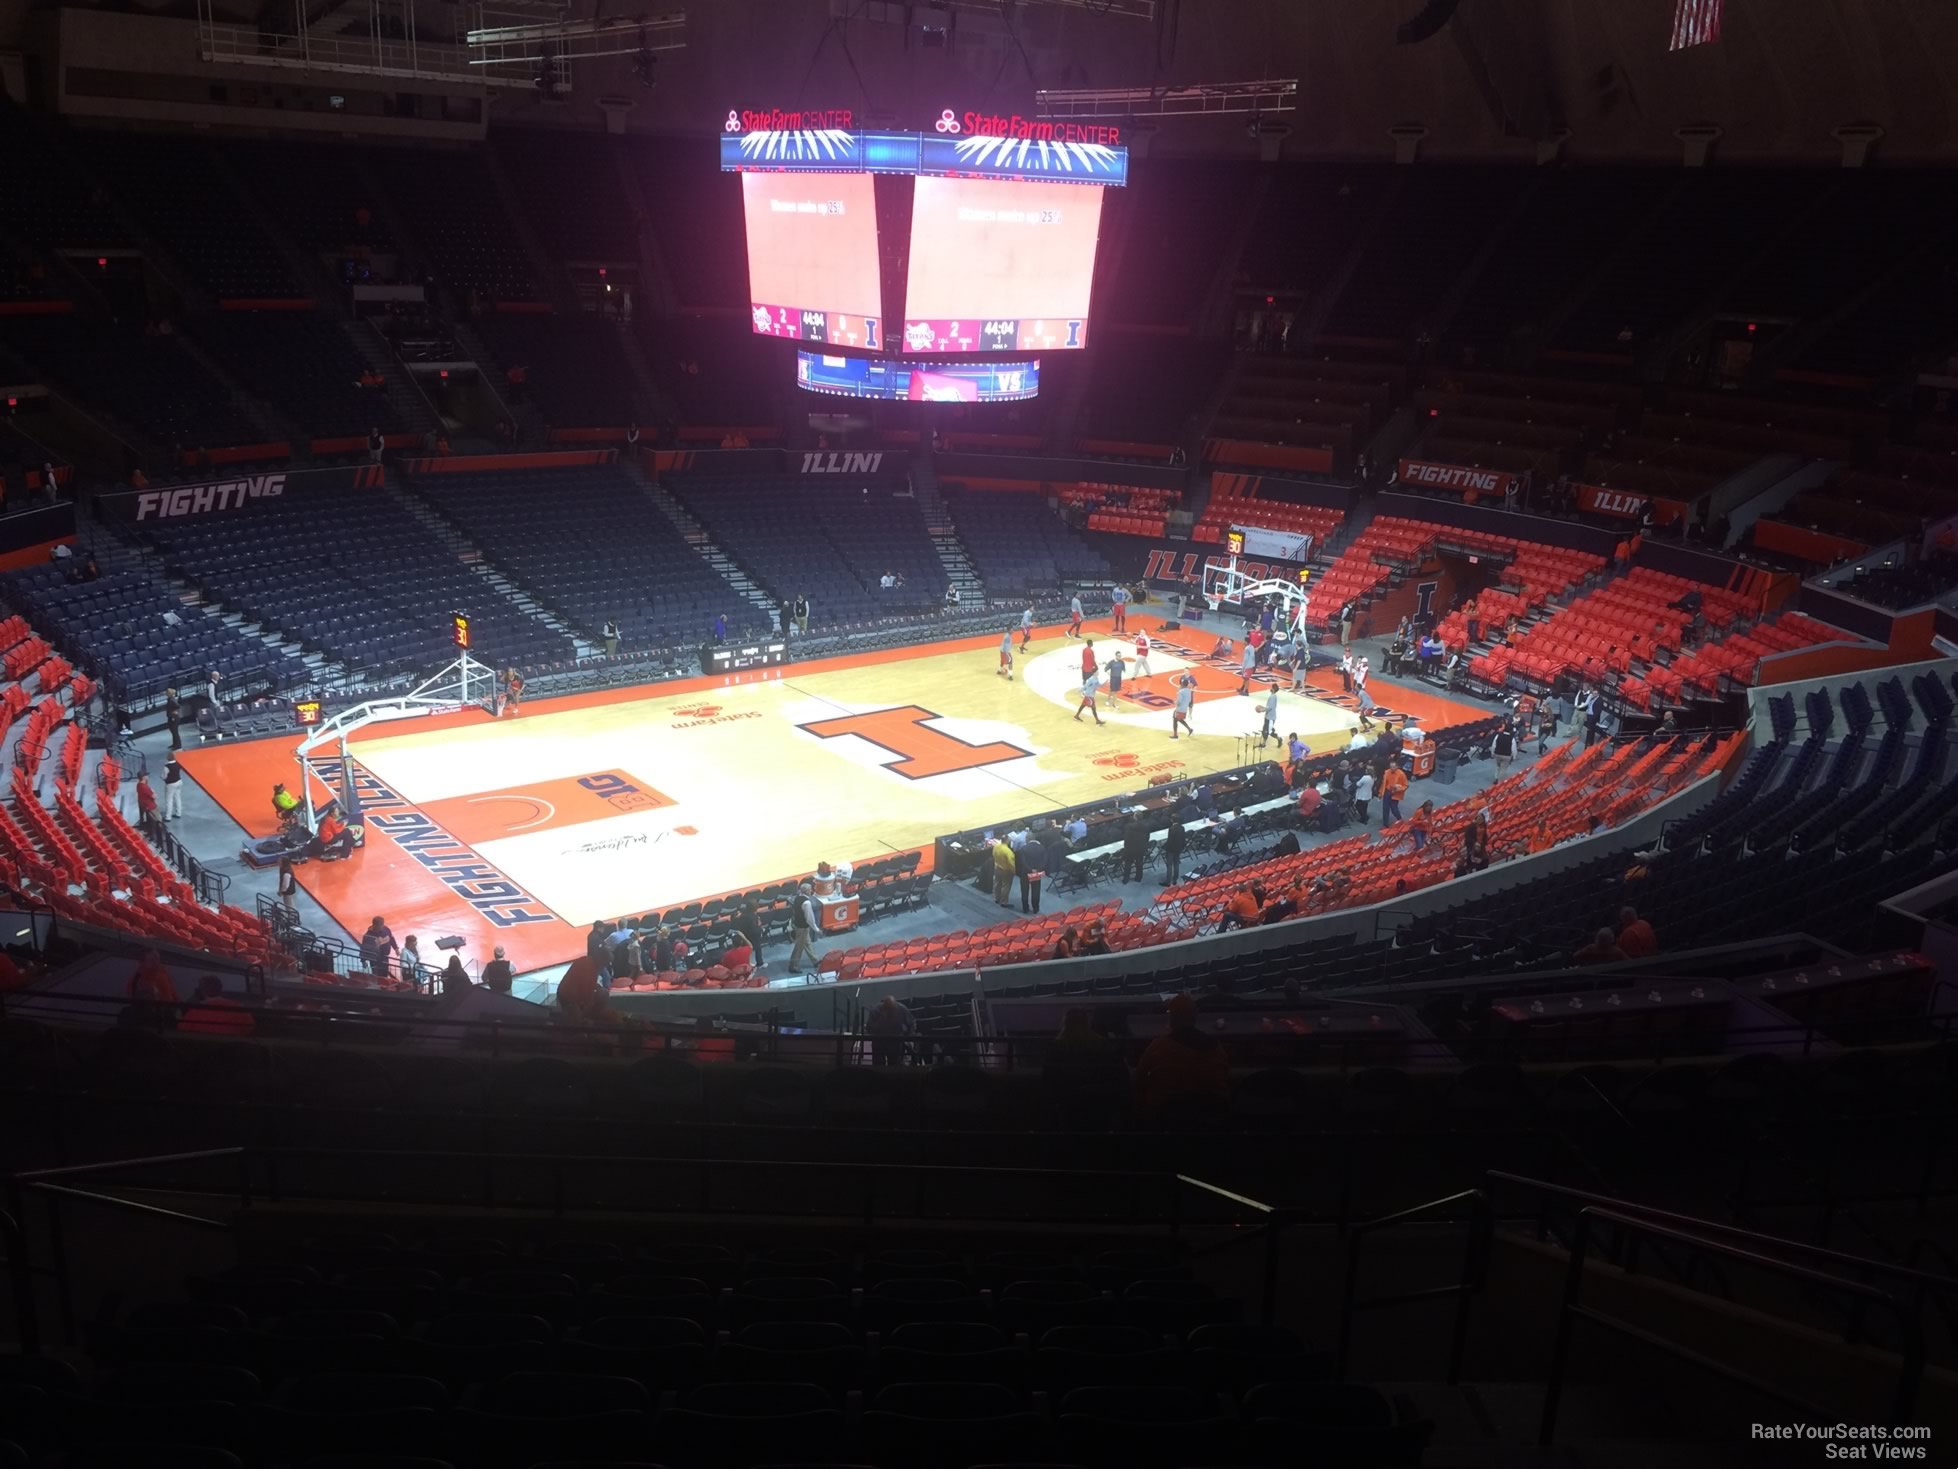 section 230, row 10 seat view  - state farm center